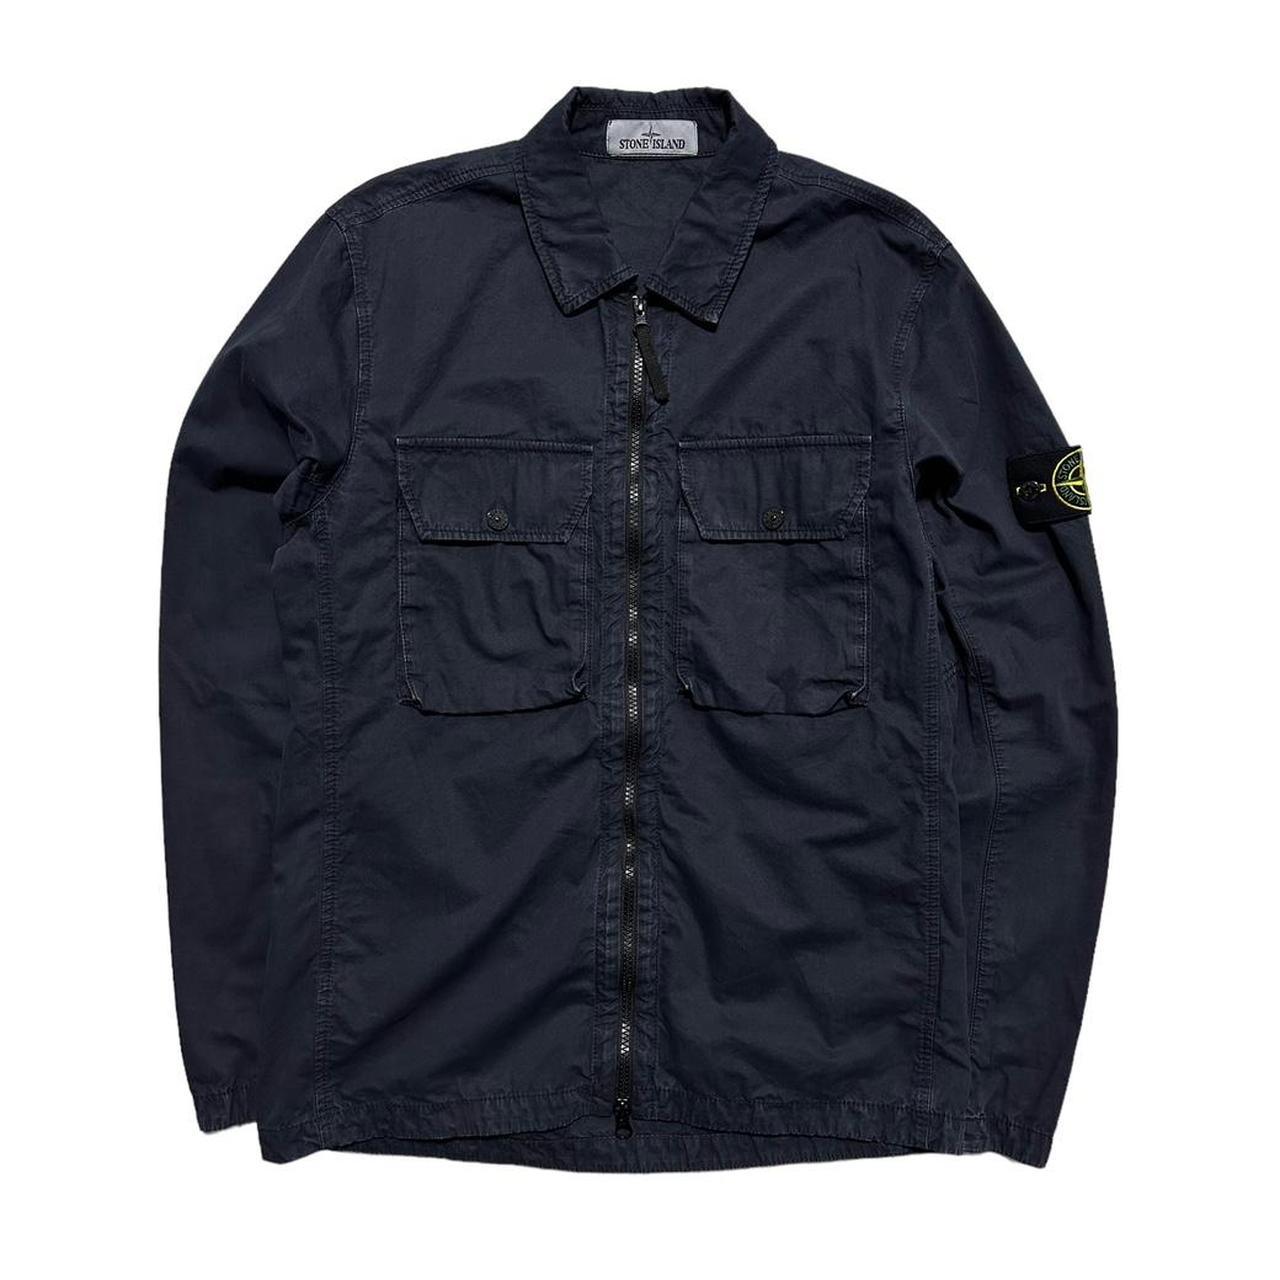 Stone Island Double Pocket Overshirt - Known Source